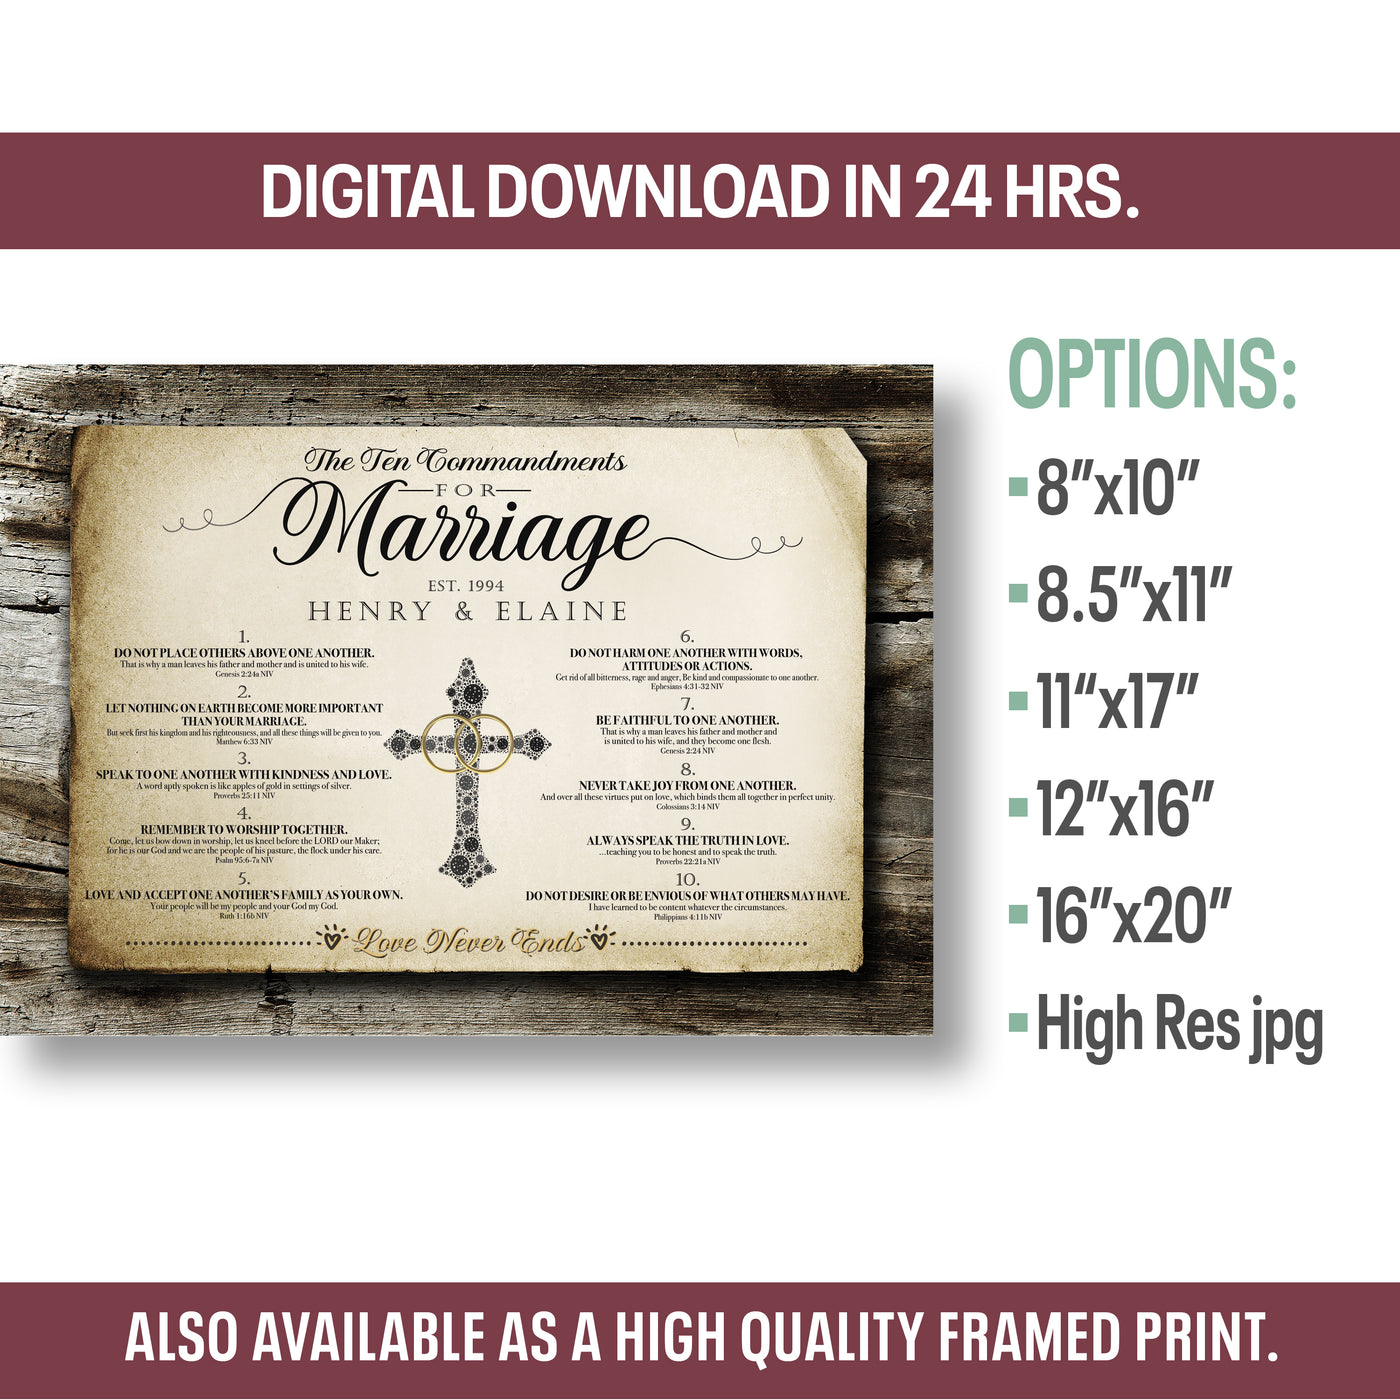 10 Commandments for Marriage | Personalized Print Digital Download, Wedding Gift, Anniversary Gift | Style A Rustic